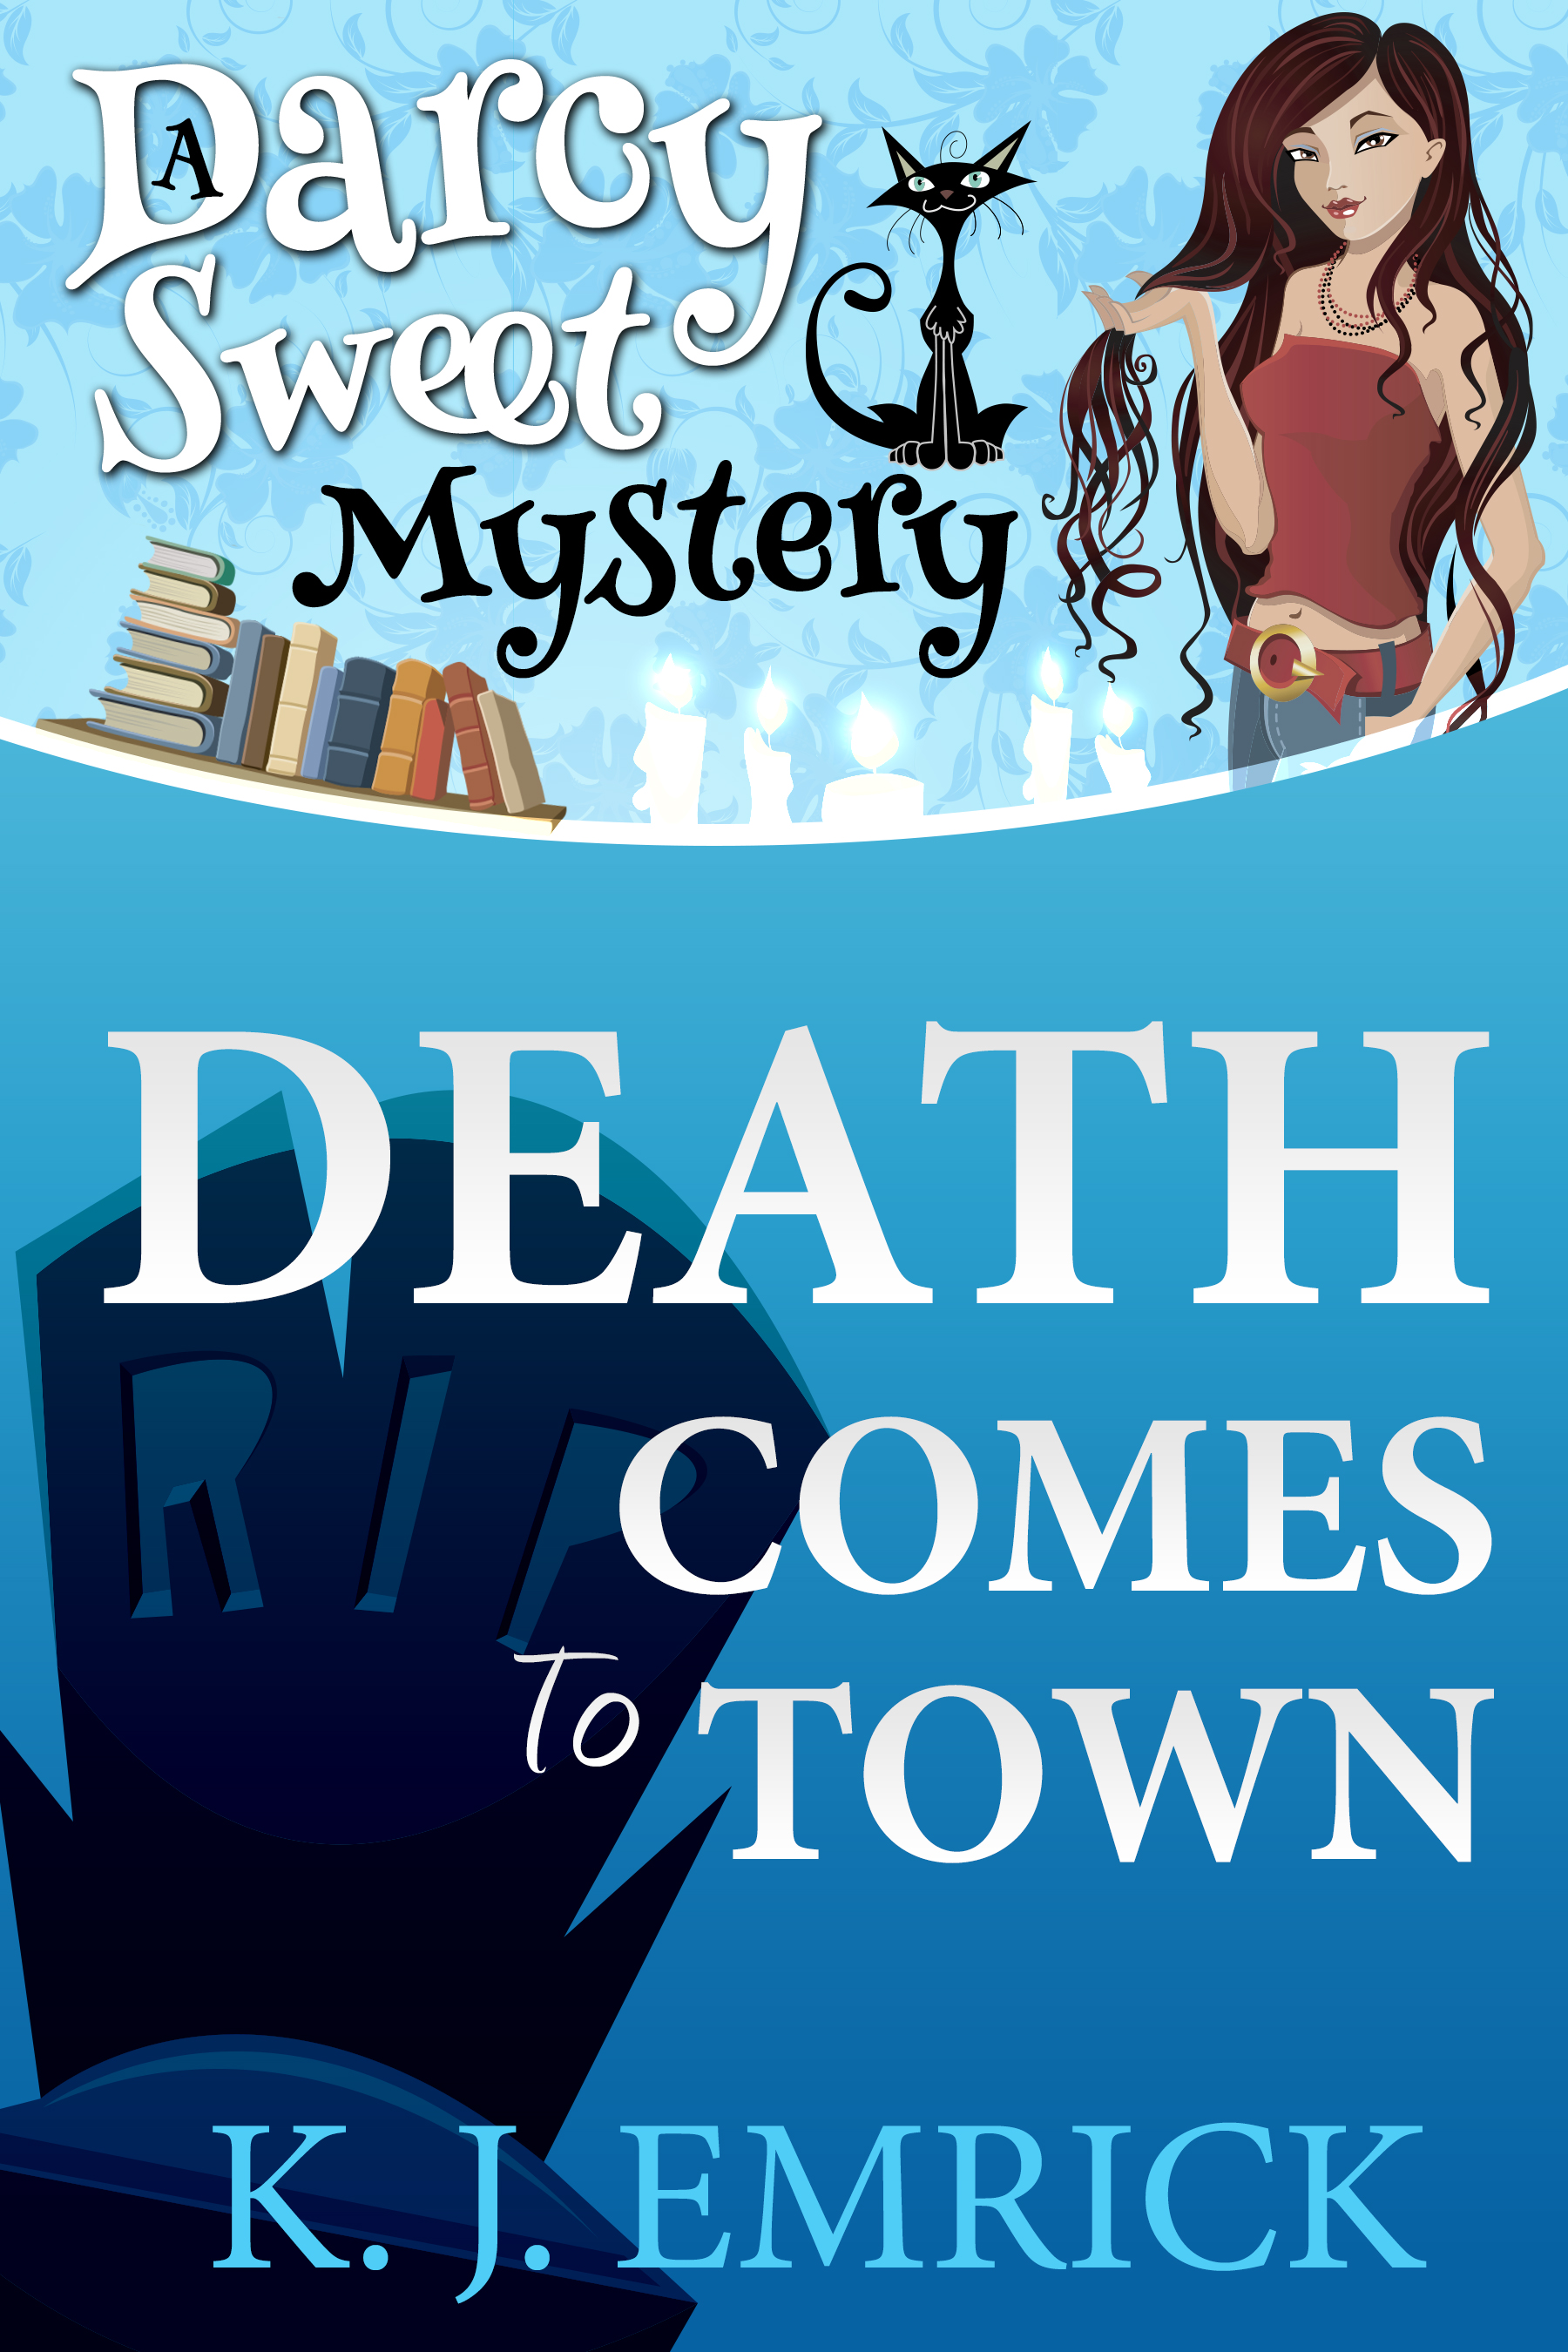 Death Comes to Town - A Darcy Sweet Mystery